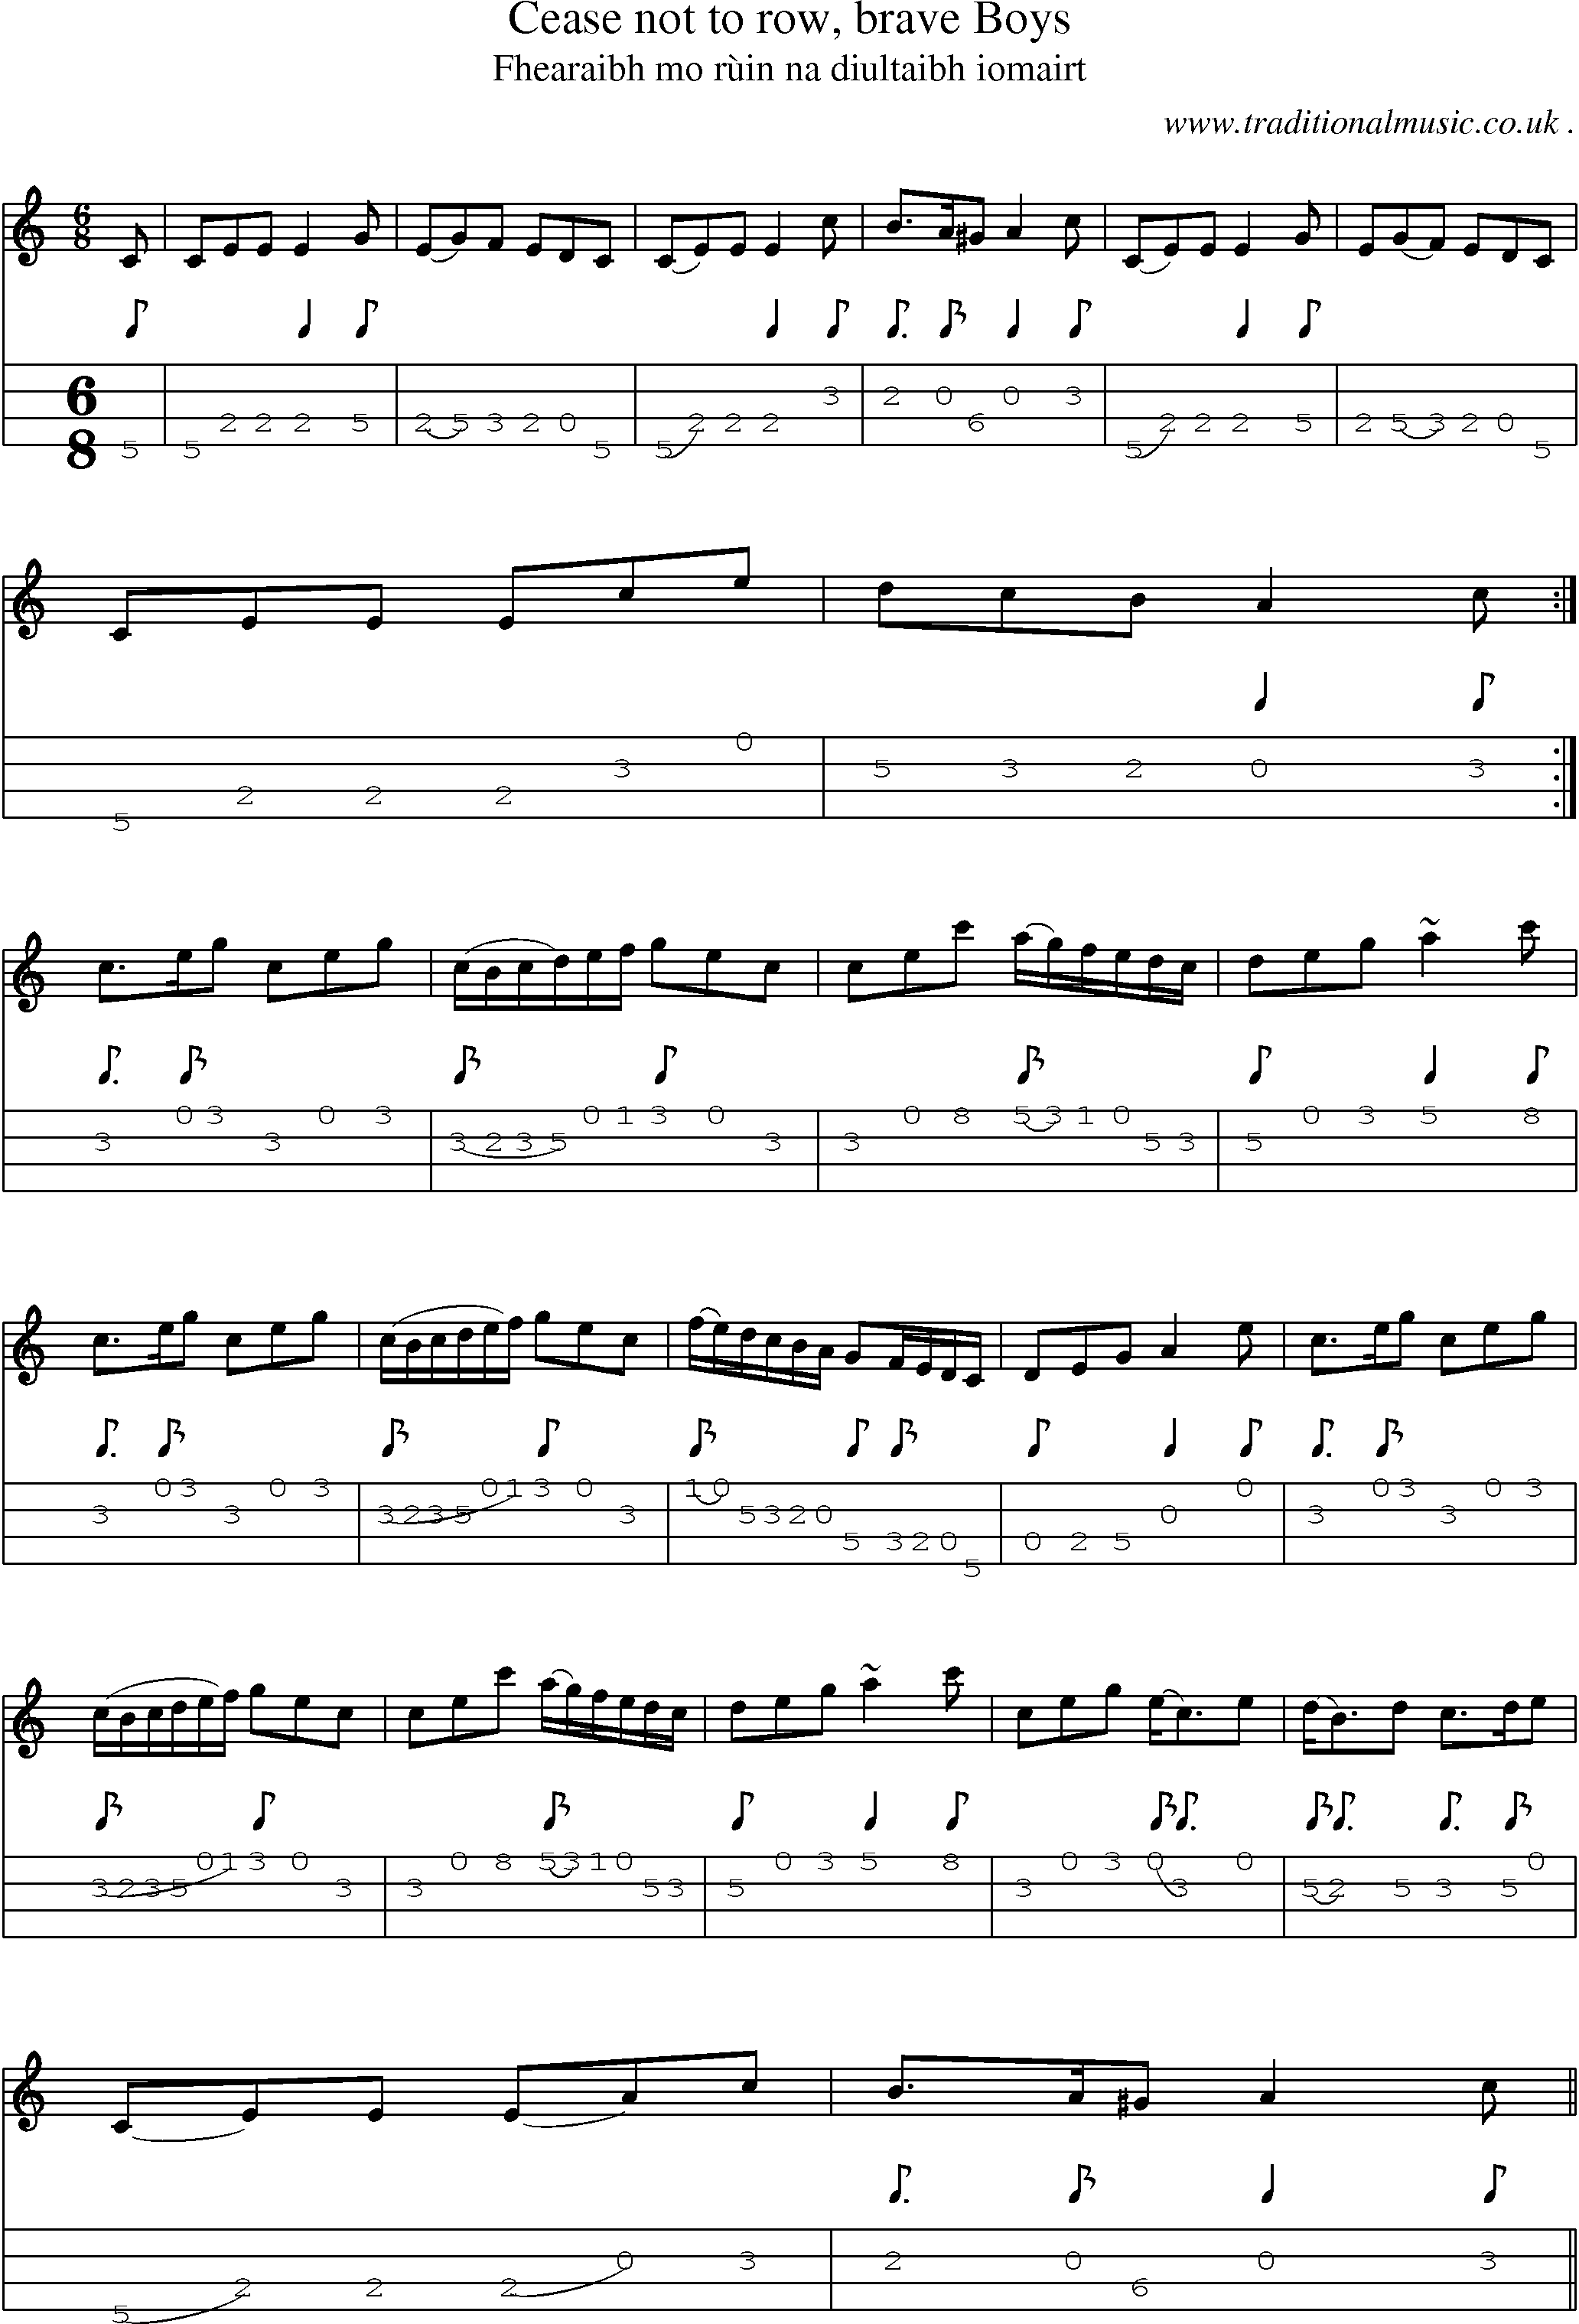 Sheet-music  score, Chords and Mandolin Tabs for Cease Not To Row Brave Boys